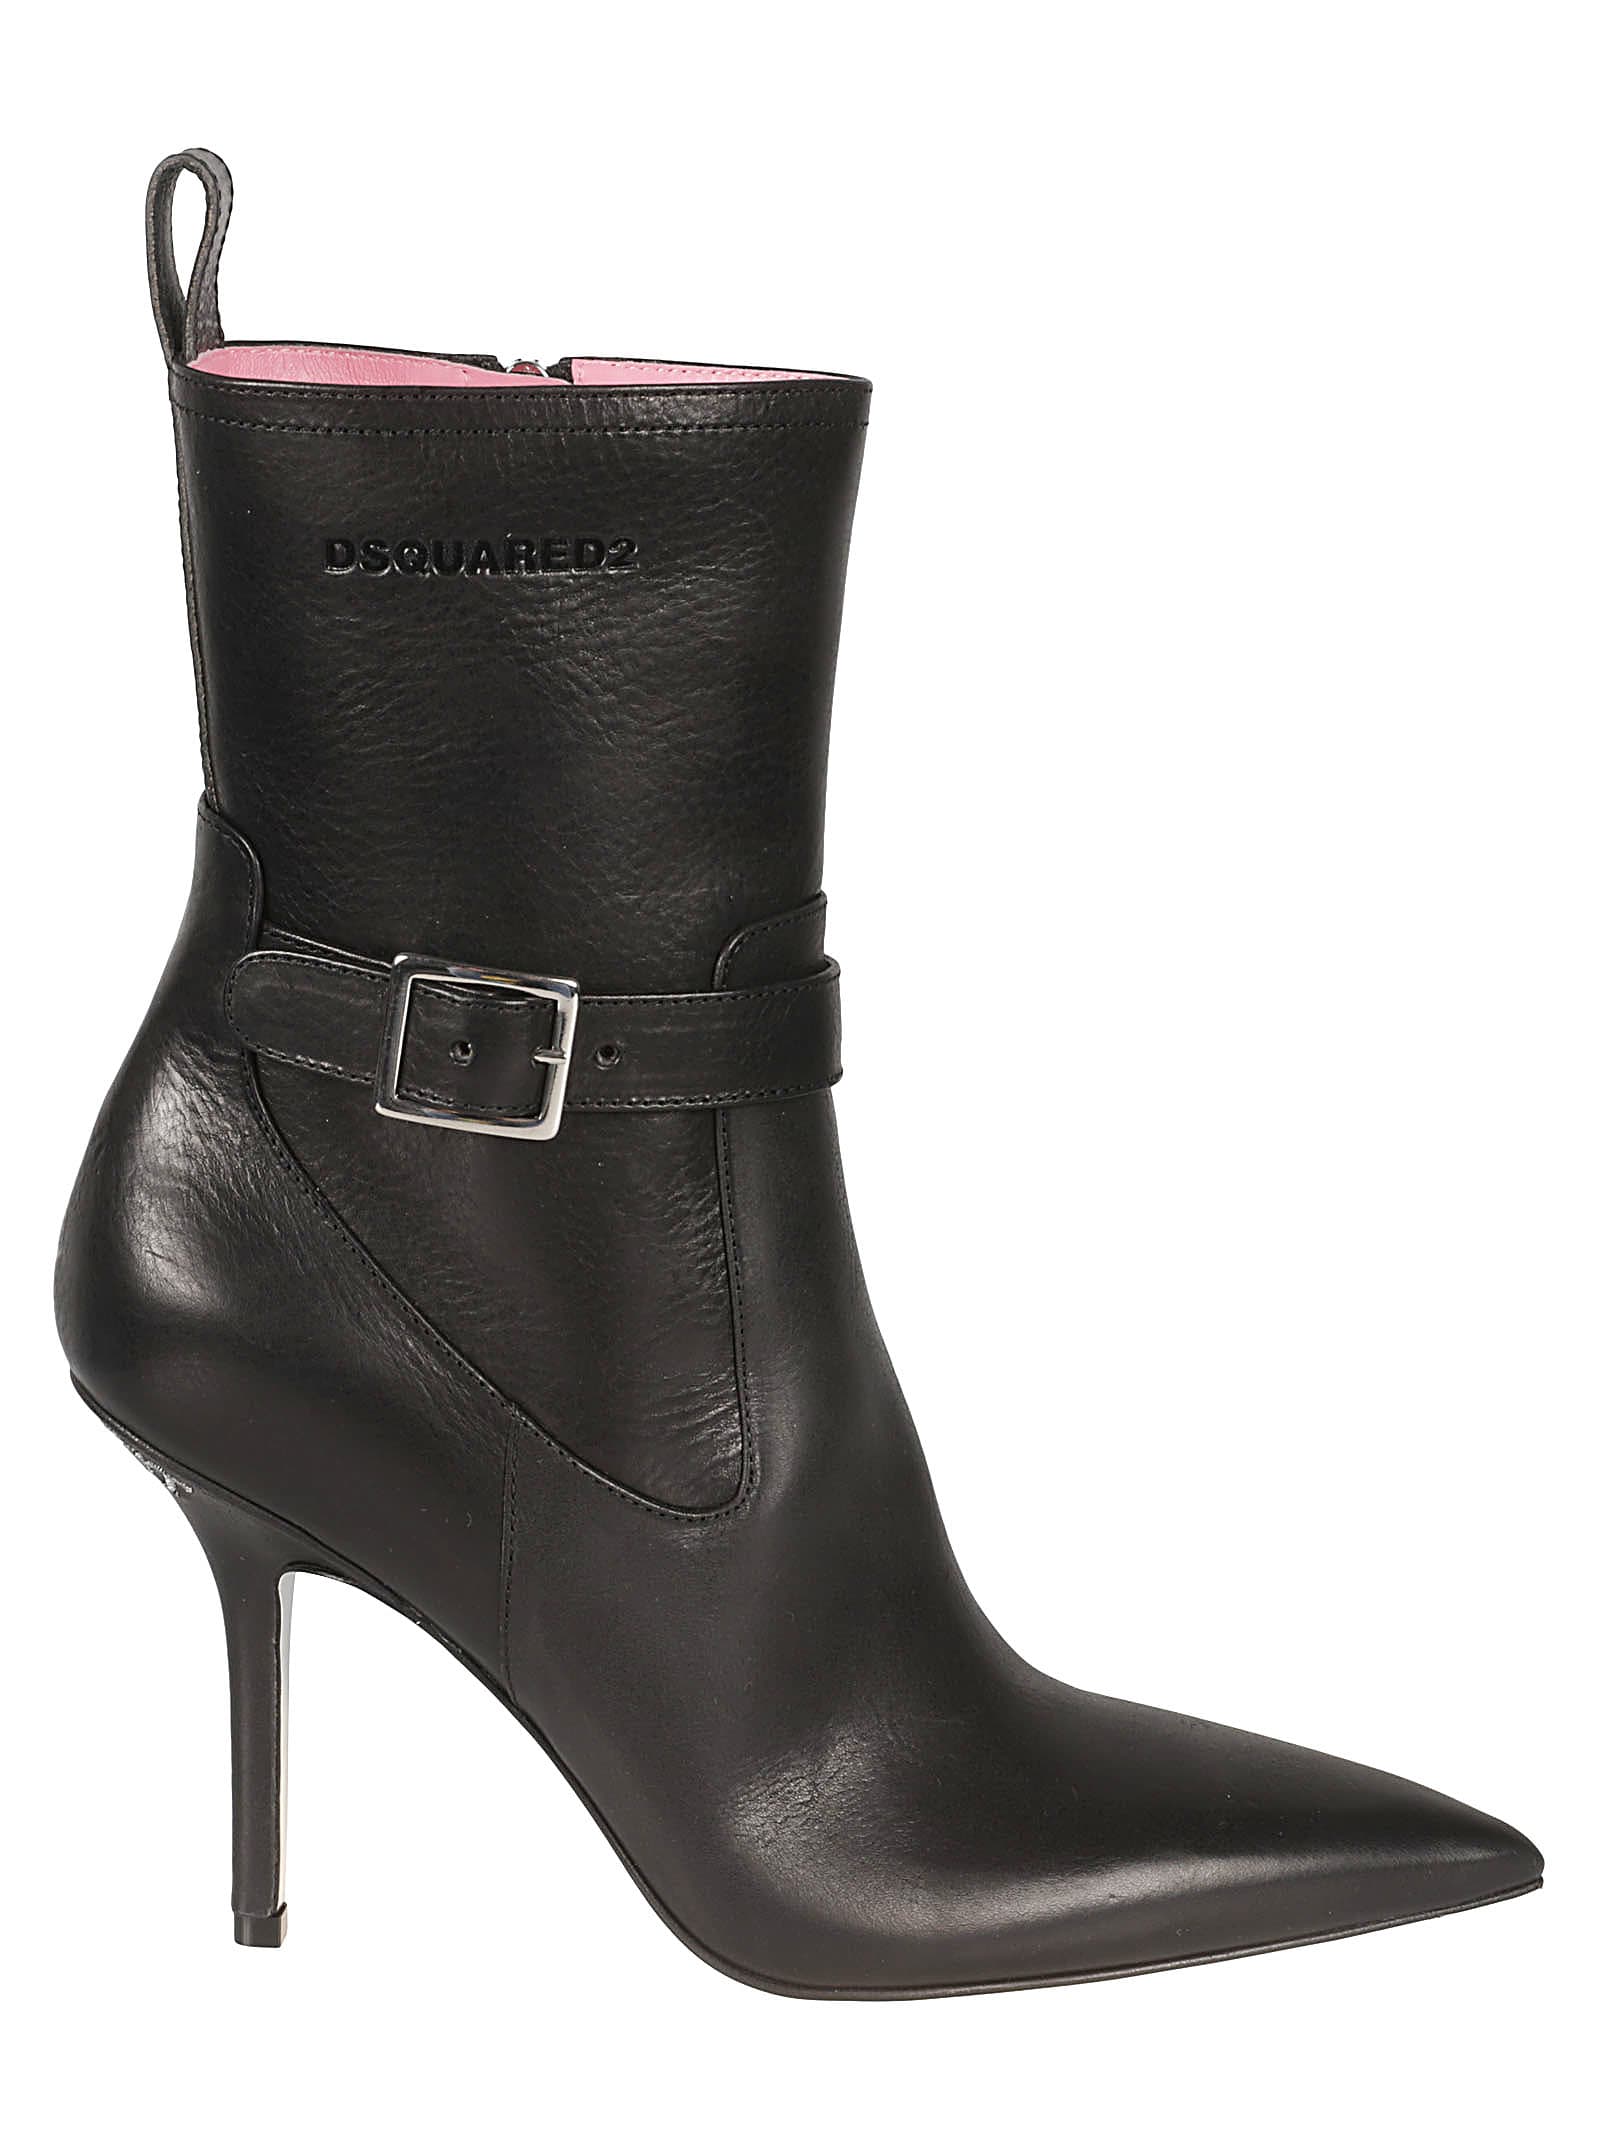 DSQUARED2 HEELED ANKLE BOOTS